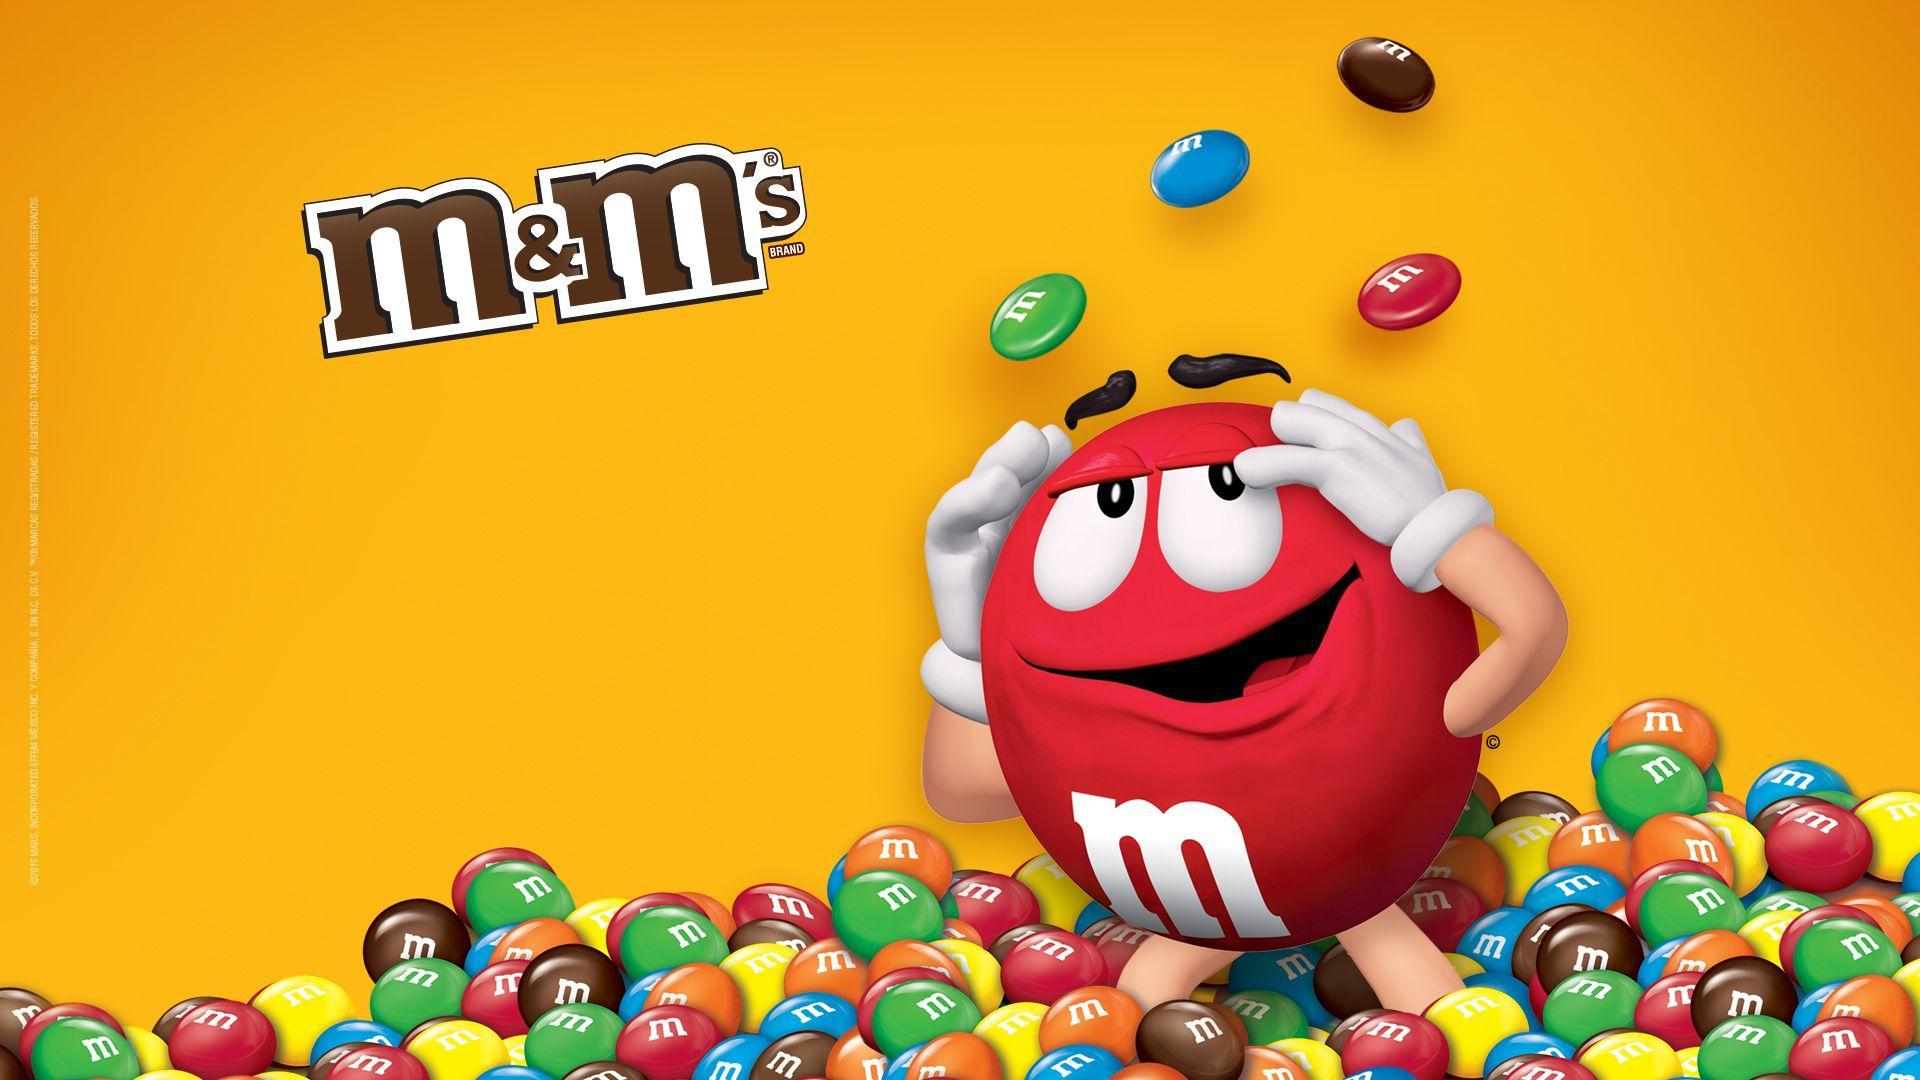 Pin by Evelyn on Wallpapers  M&m characters, Cartoon animals